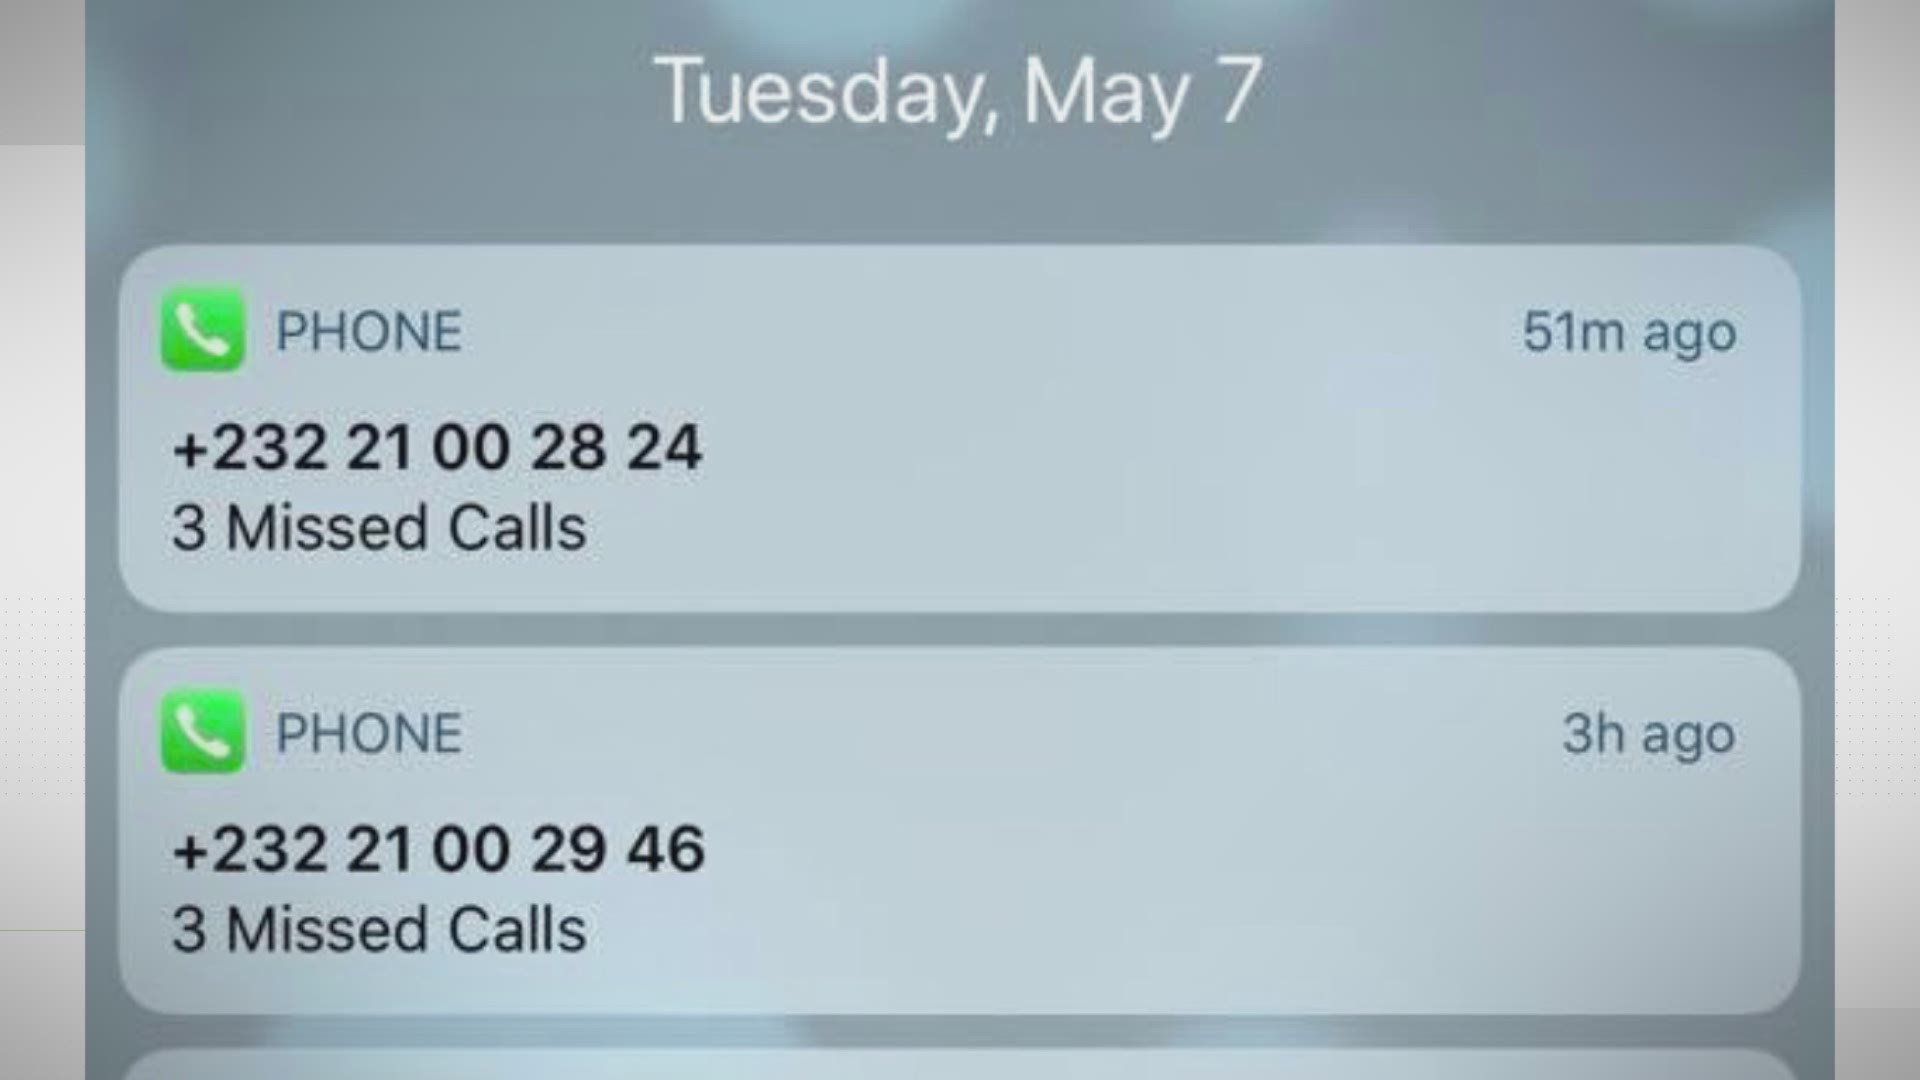 Have you been getting calls from Mauritania or Sierra Leone area codes? Turns out that's the first step of a scam.